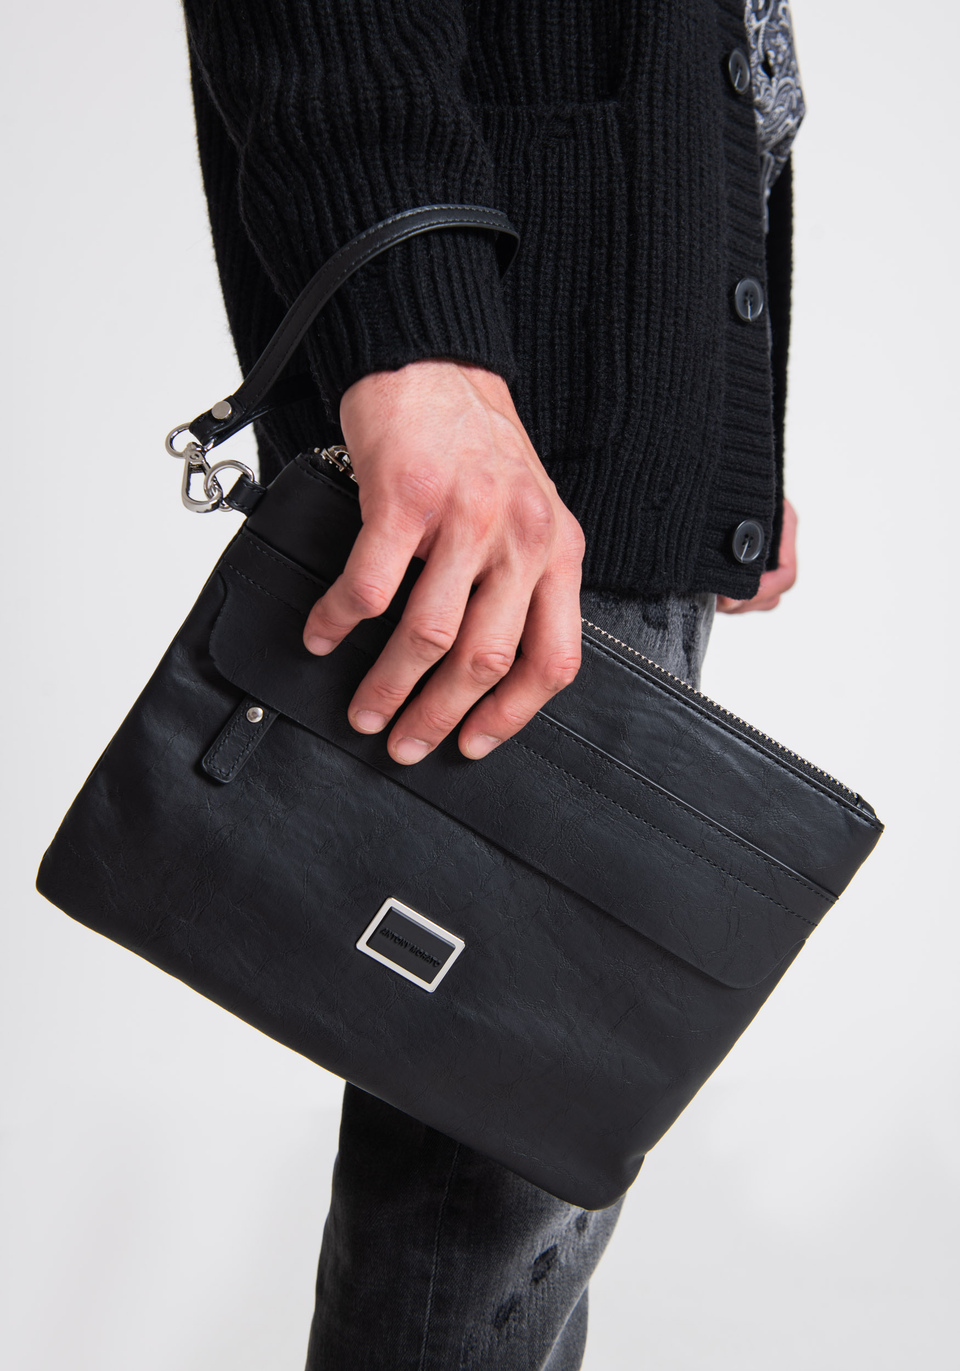 FAUX-LEATHER POUCH WITH POCKETS AND ZIPS - Antony Morato Online Shop